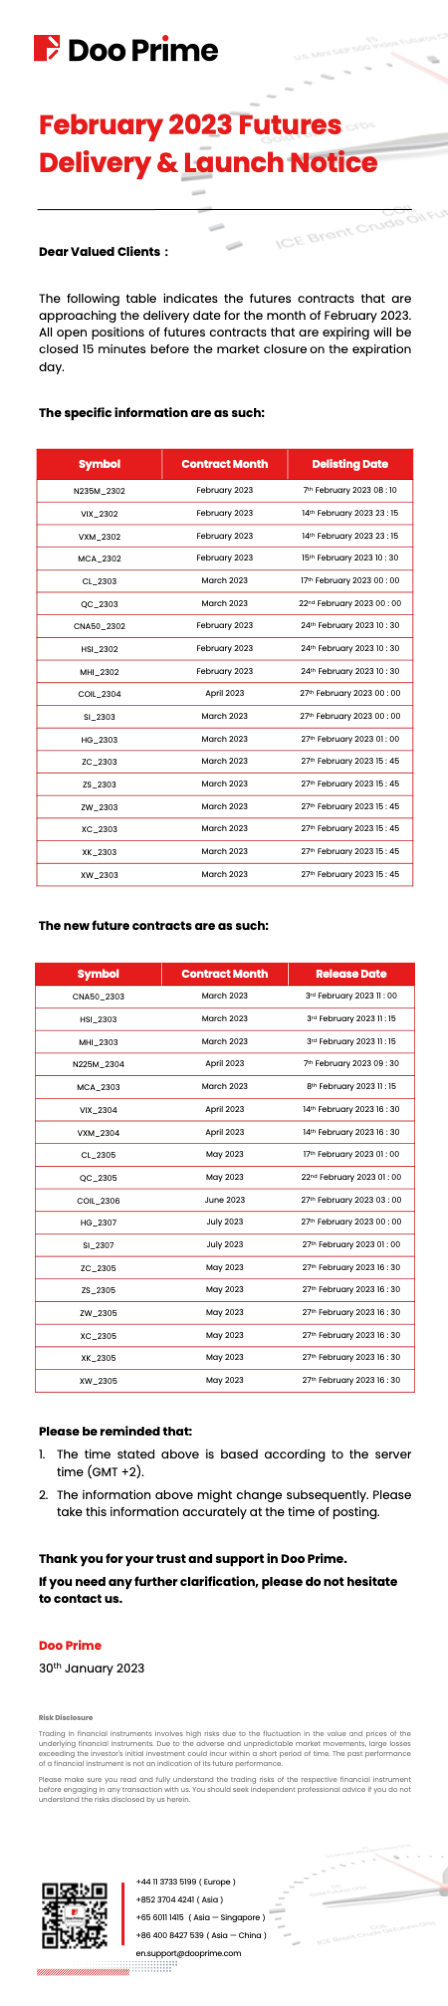 Doo Prime 2023 Futures Delivery & Launch Notice